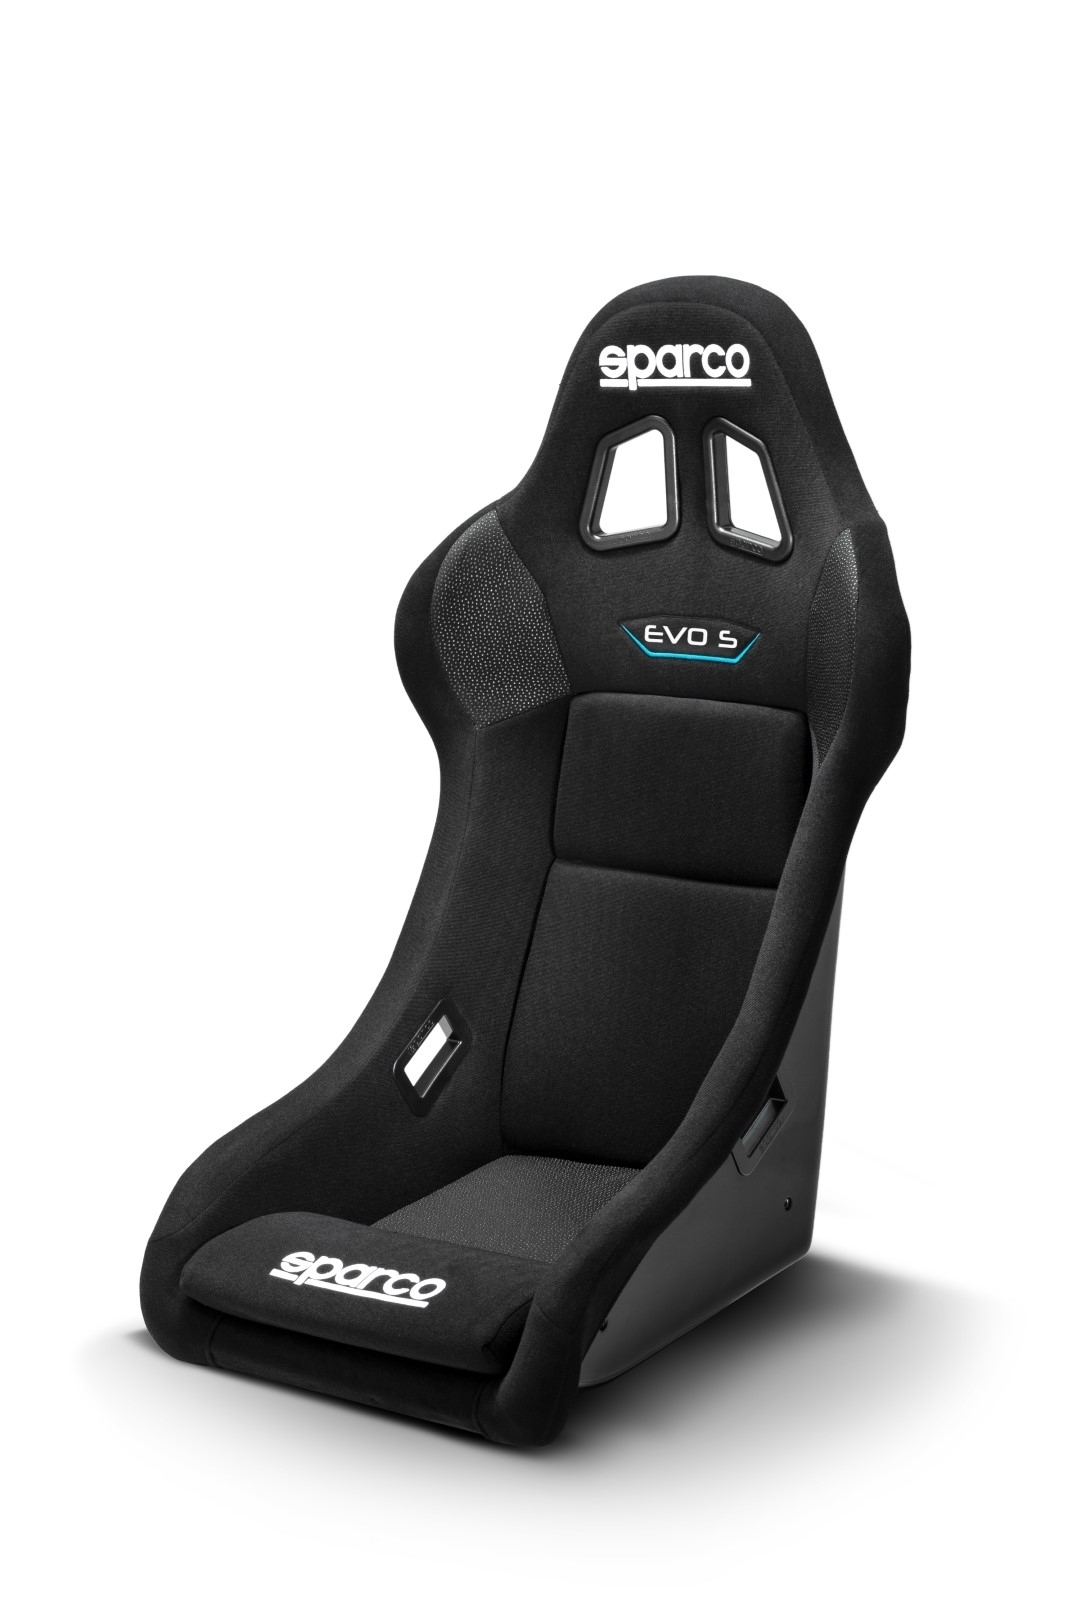 Spacro EVO QRT S Competition Racing Seat, Corvette, Camaro, Mustang Fitment